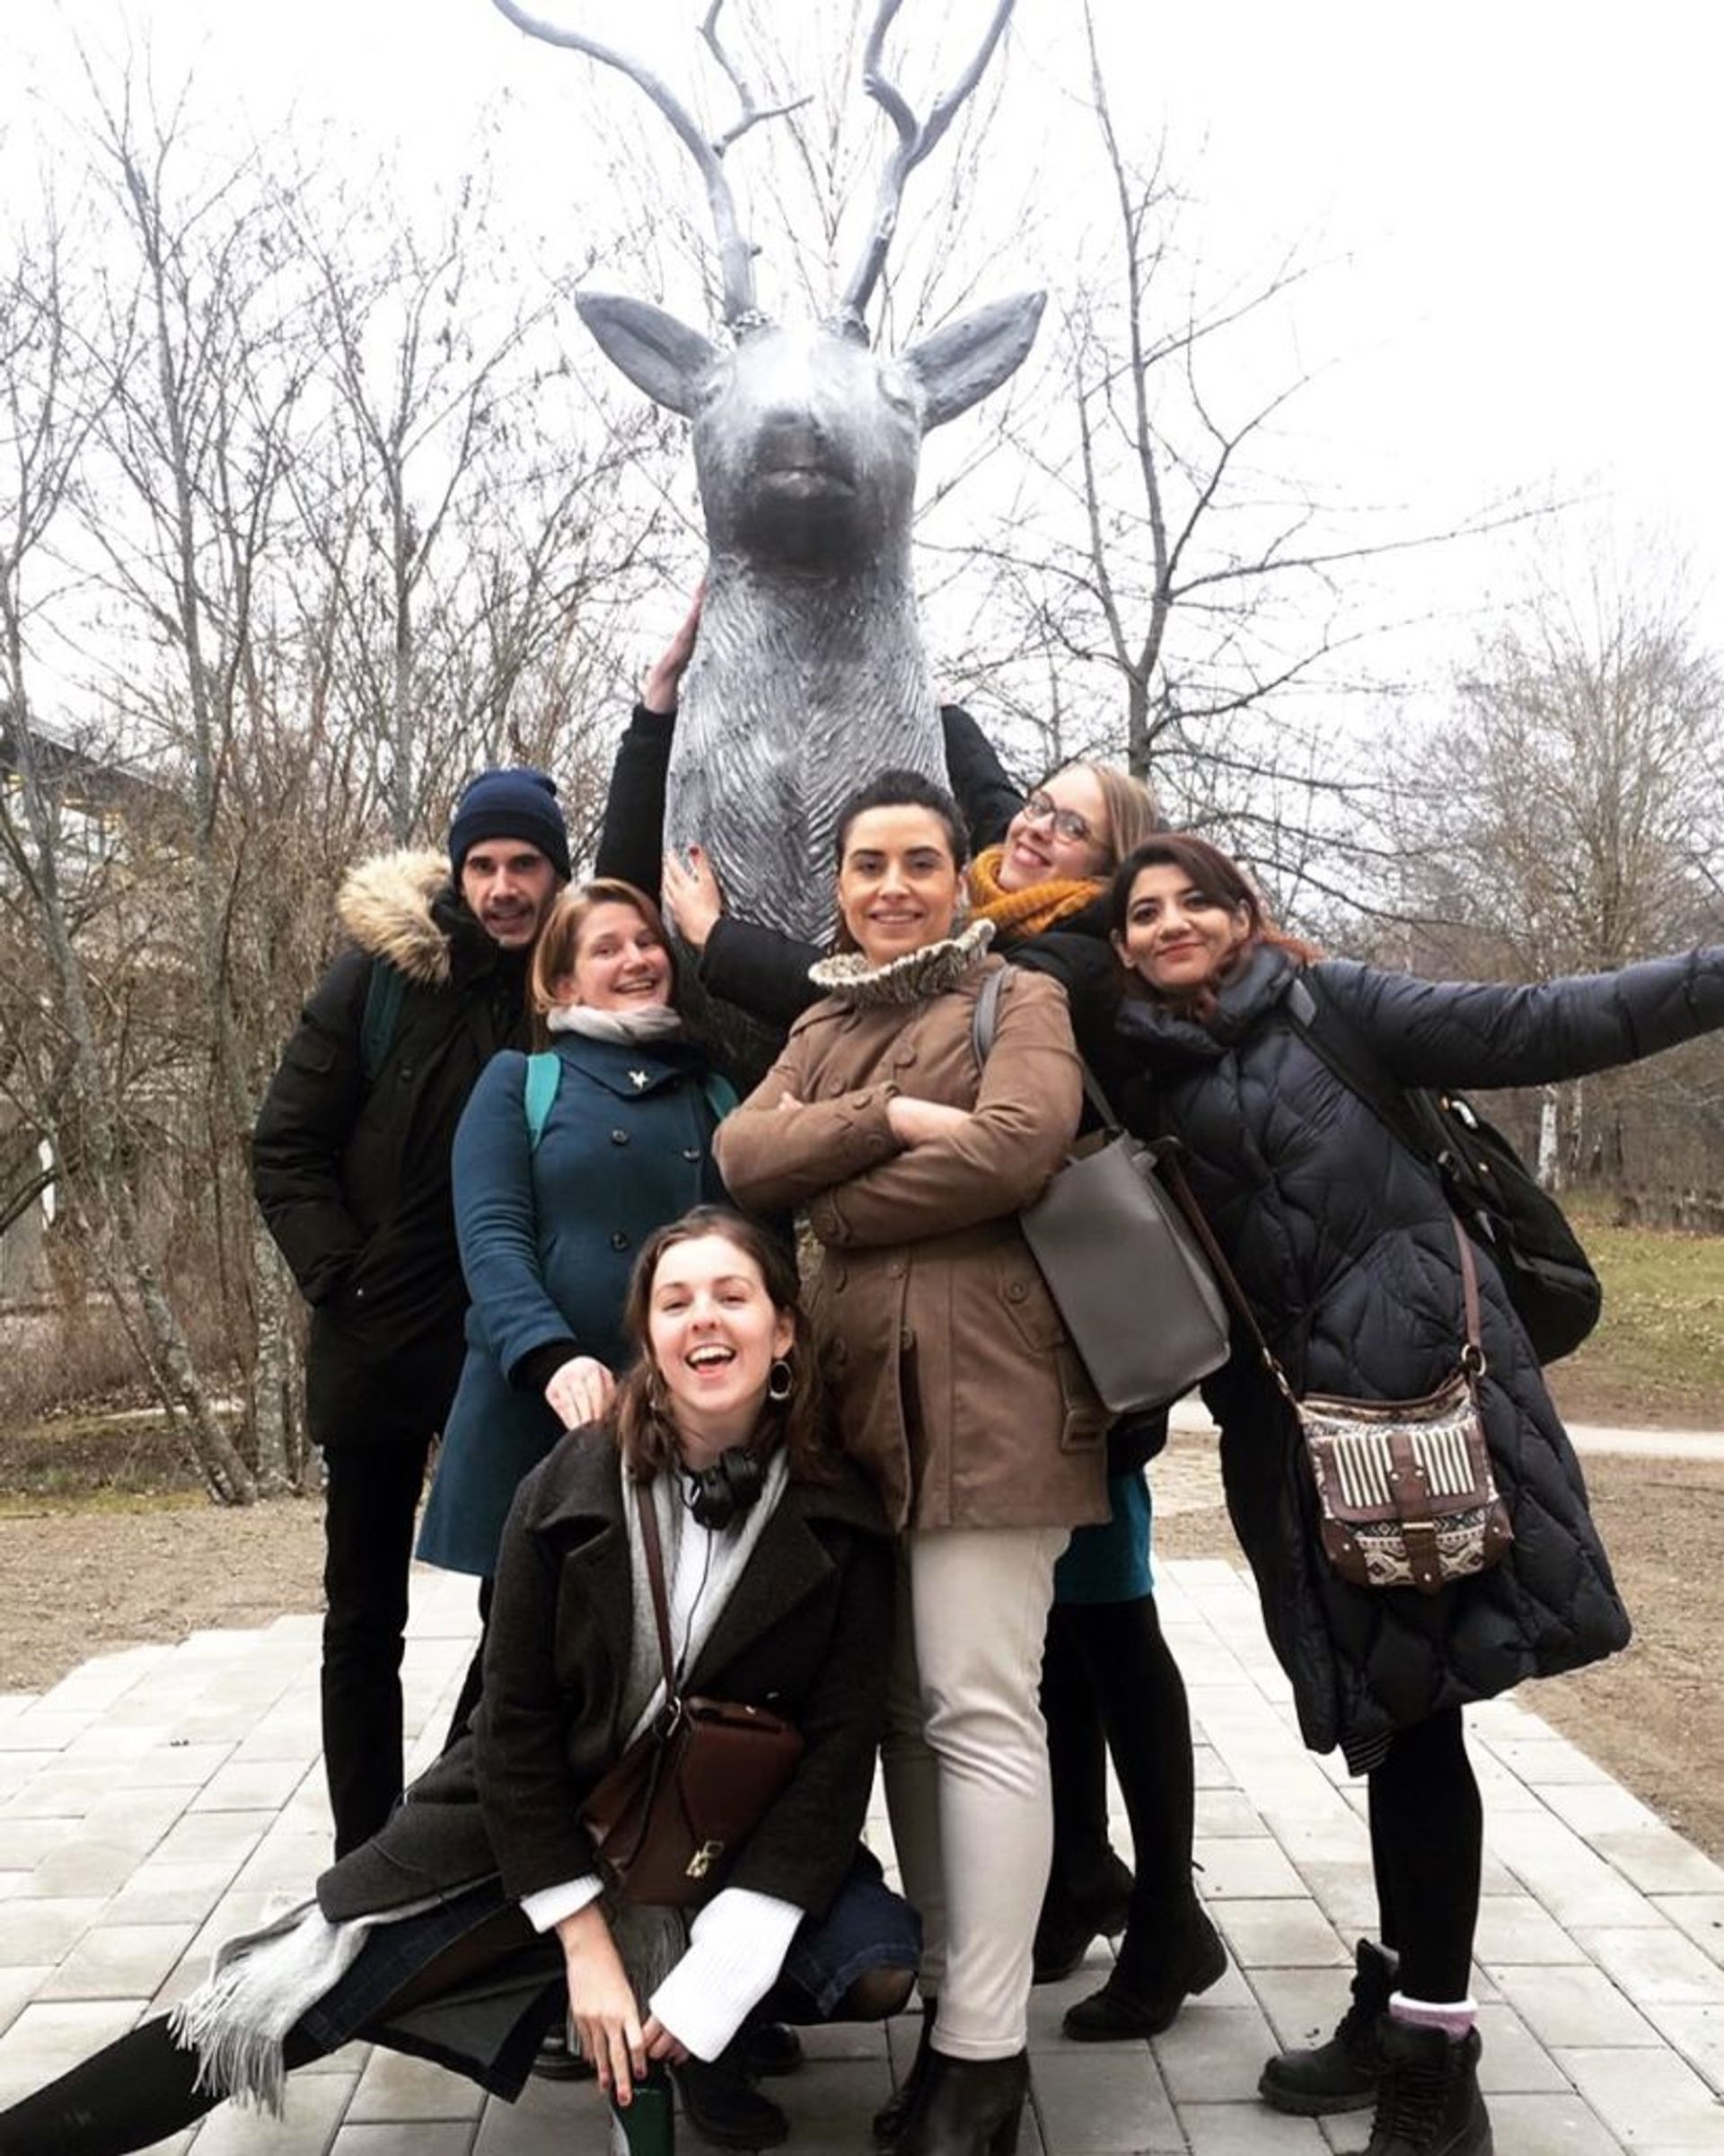 Students posing in front of a statue.